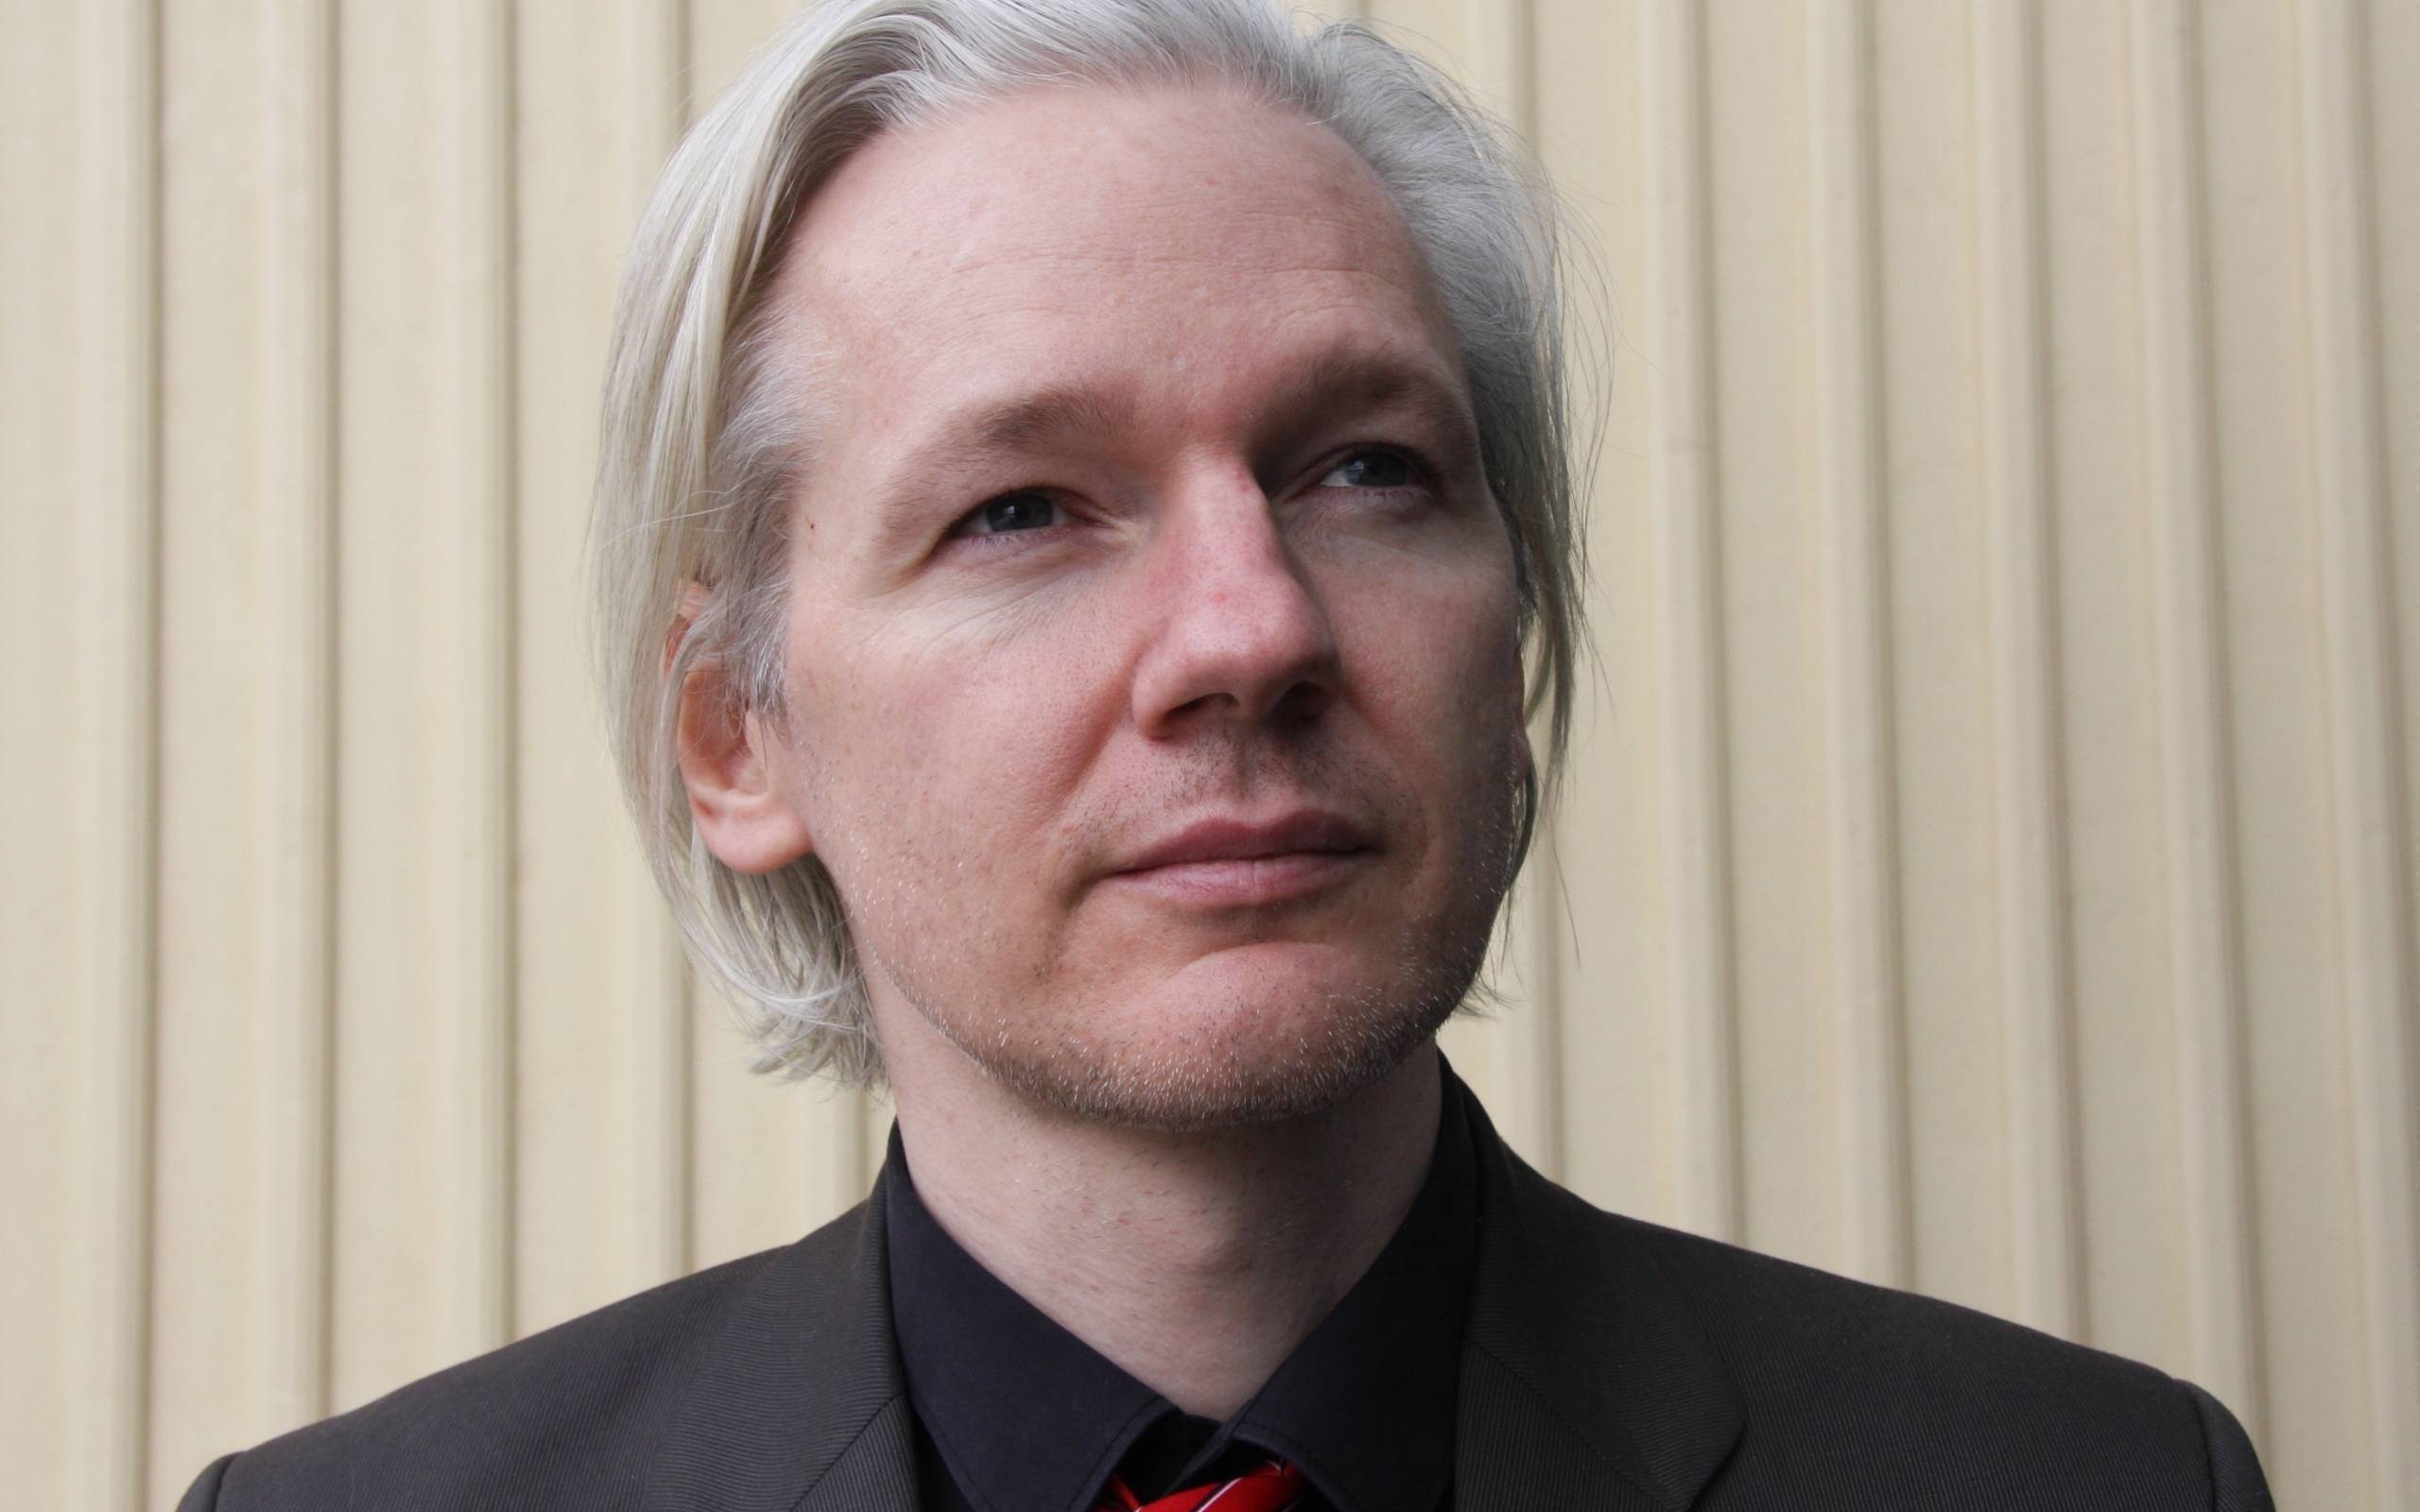 Extradition hearing against WikiLeaks founder opens in London's Old Bailey